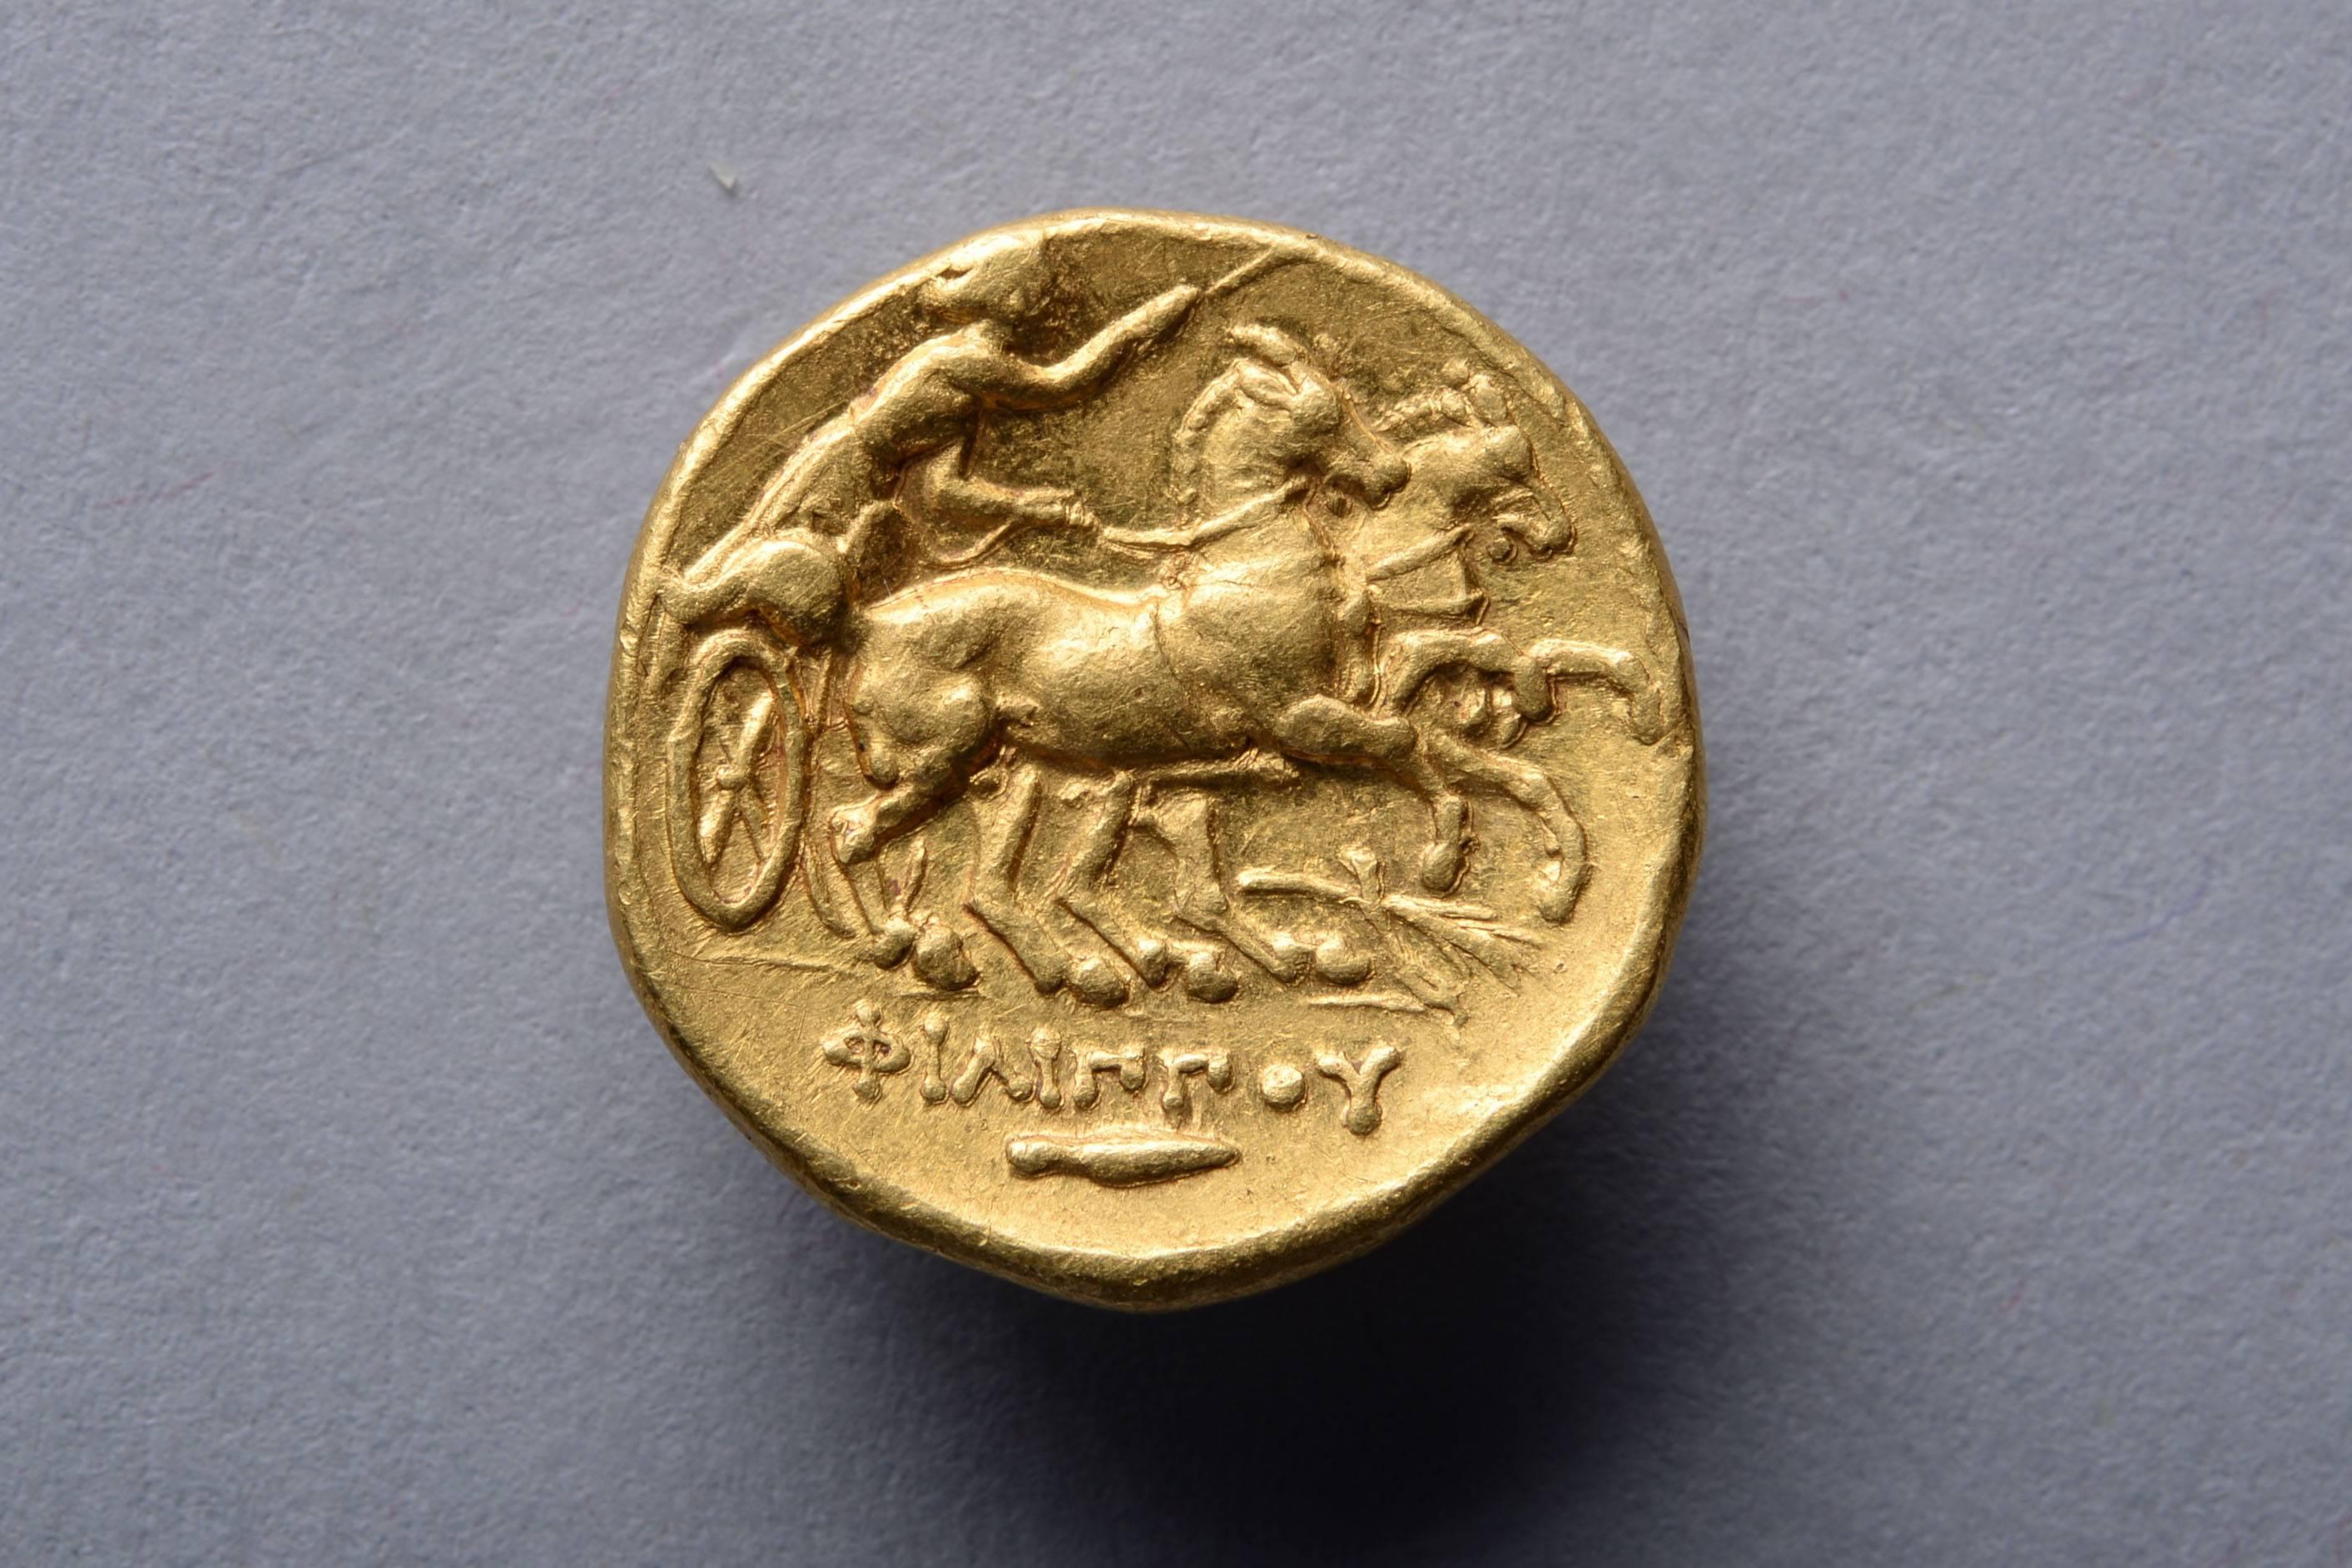 A gold stater issued in the name of King Philip II of Macedon, father of Alexander the Great. Minted in Teos, circa 323-316 BC. 

The obverse with a fine style portrait of Apollo, wide eyed, his lip slightly curled, a laurel wreath running through